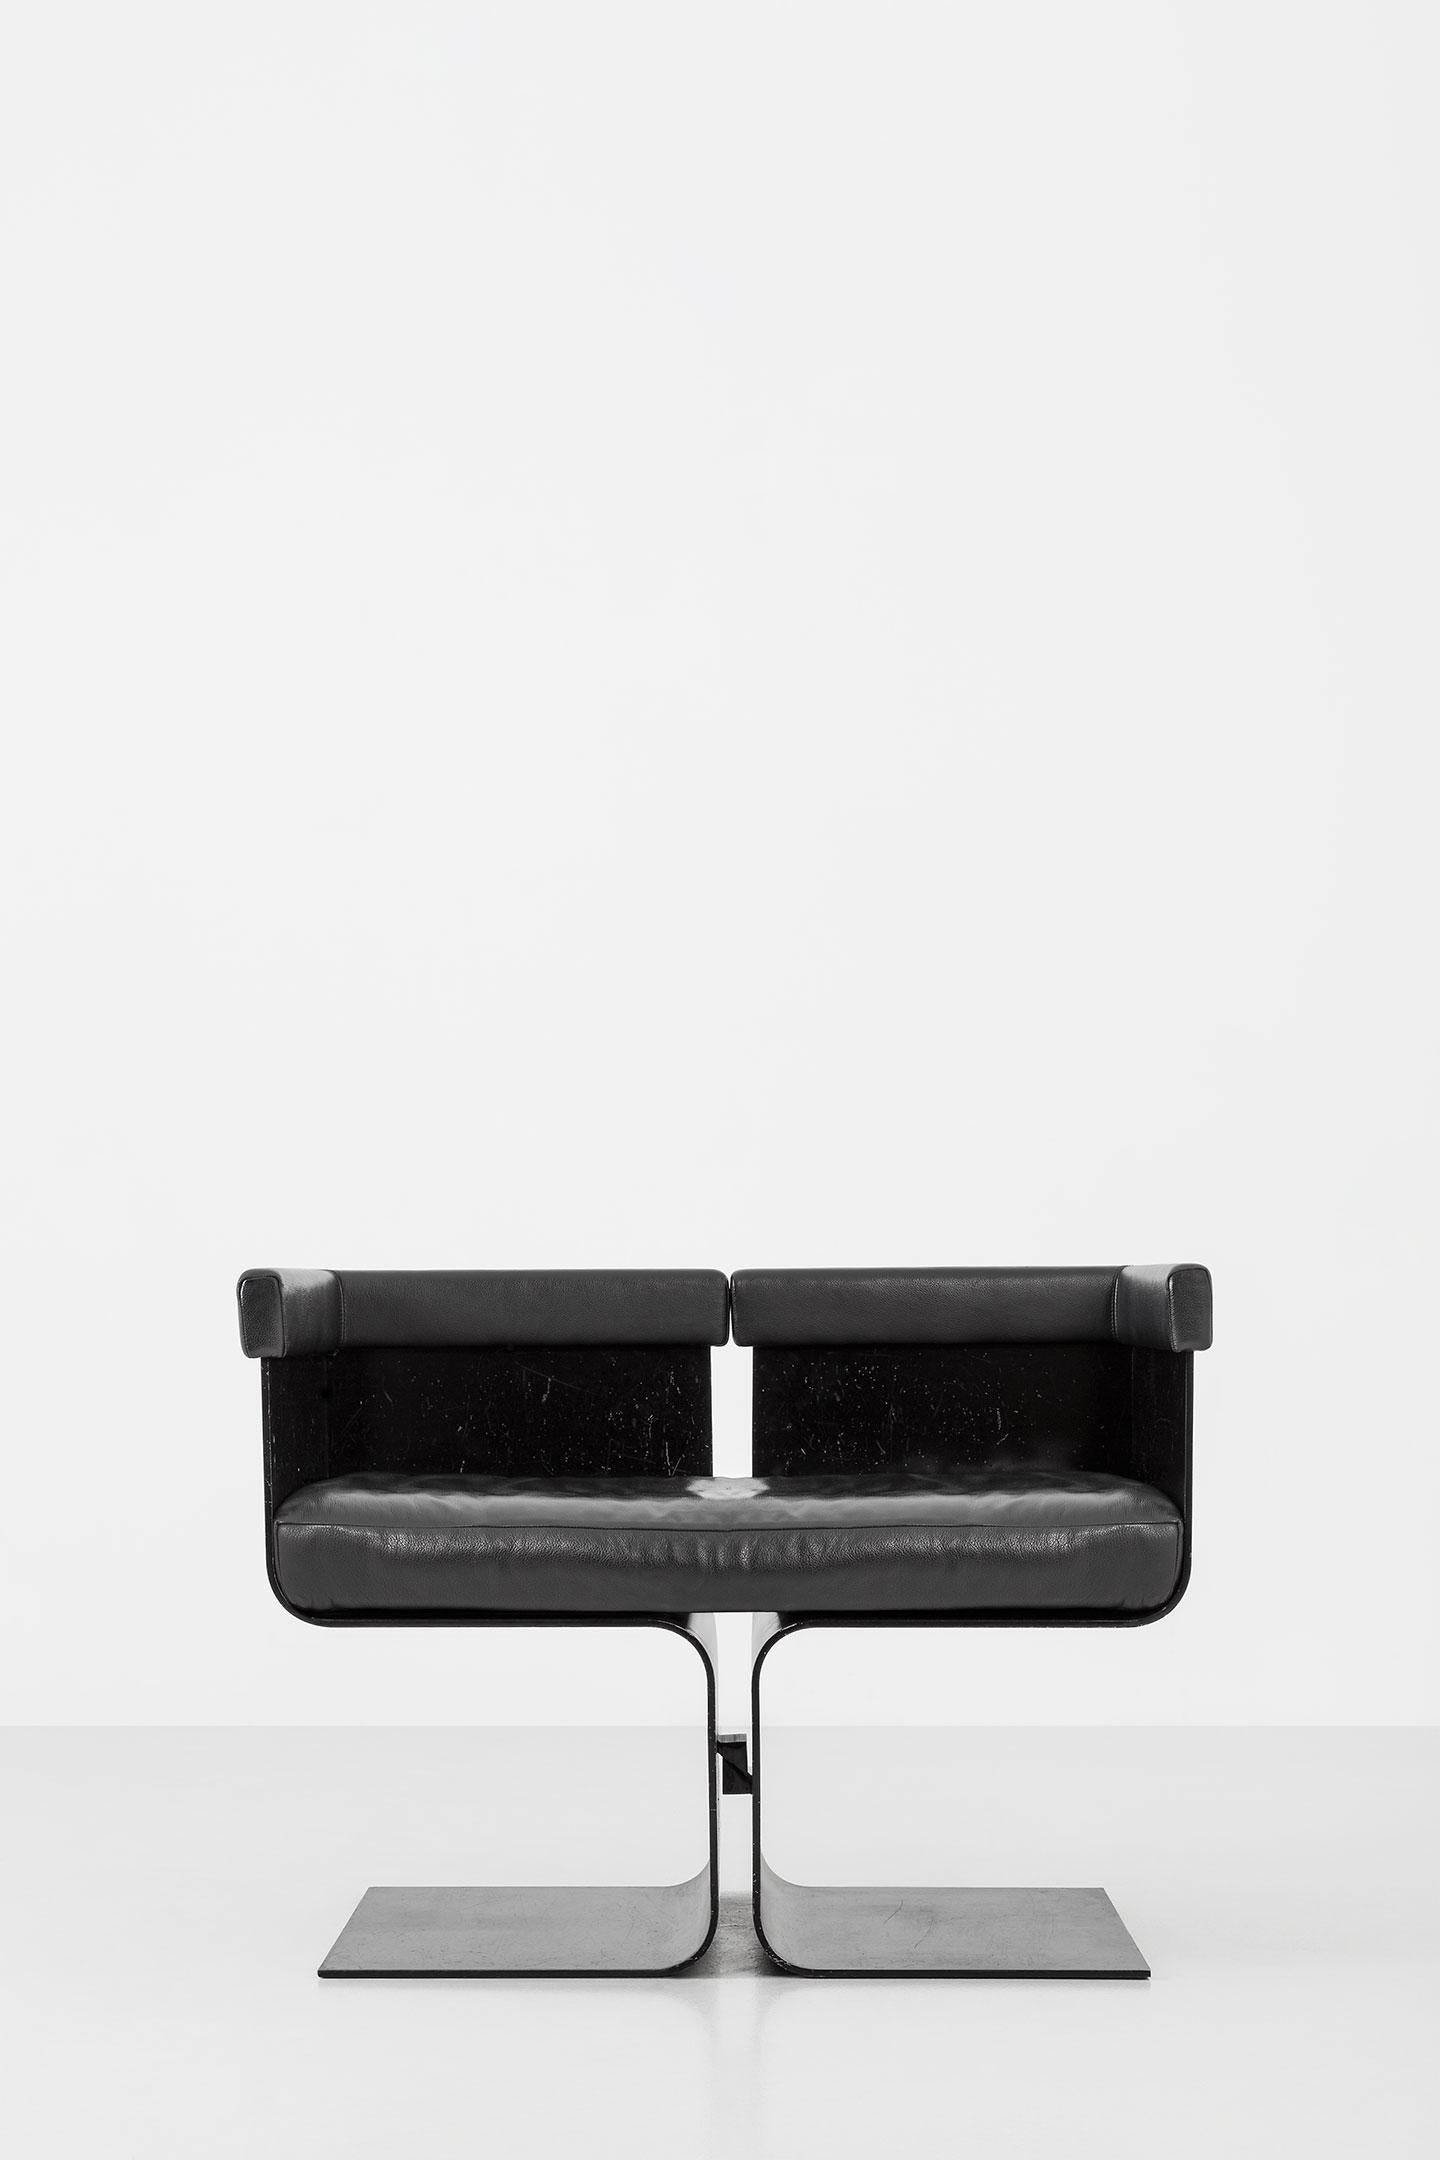 Armchair composed of two C-shaped black painted metal elements.
Cushion padded with polyurethane foam and upholstered in black leather.
Progetto Non Finito collection.